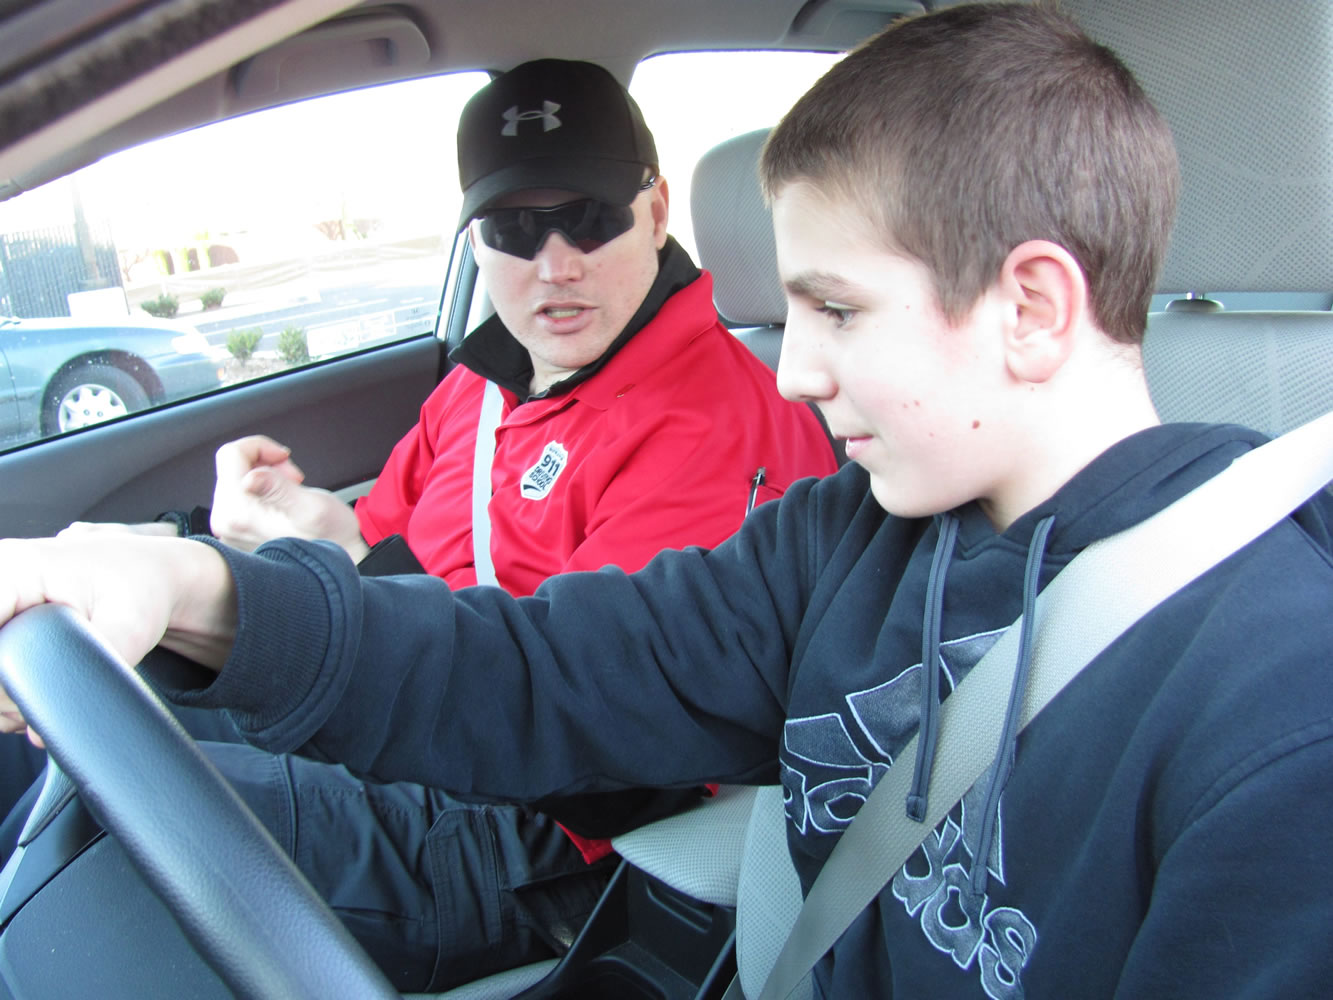 Geary Enbody, an instructor with the 9-1-1 Driving School in the 192nd Avenue Station, talks to Washougal High School freshman Brody Oberg. Enbody, an officer with the Woodland Police Department, is among the law enforcement personnel who serve as knowledge/skills examiners.